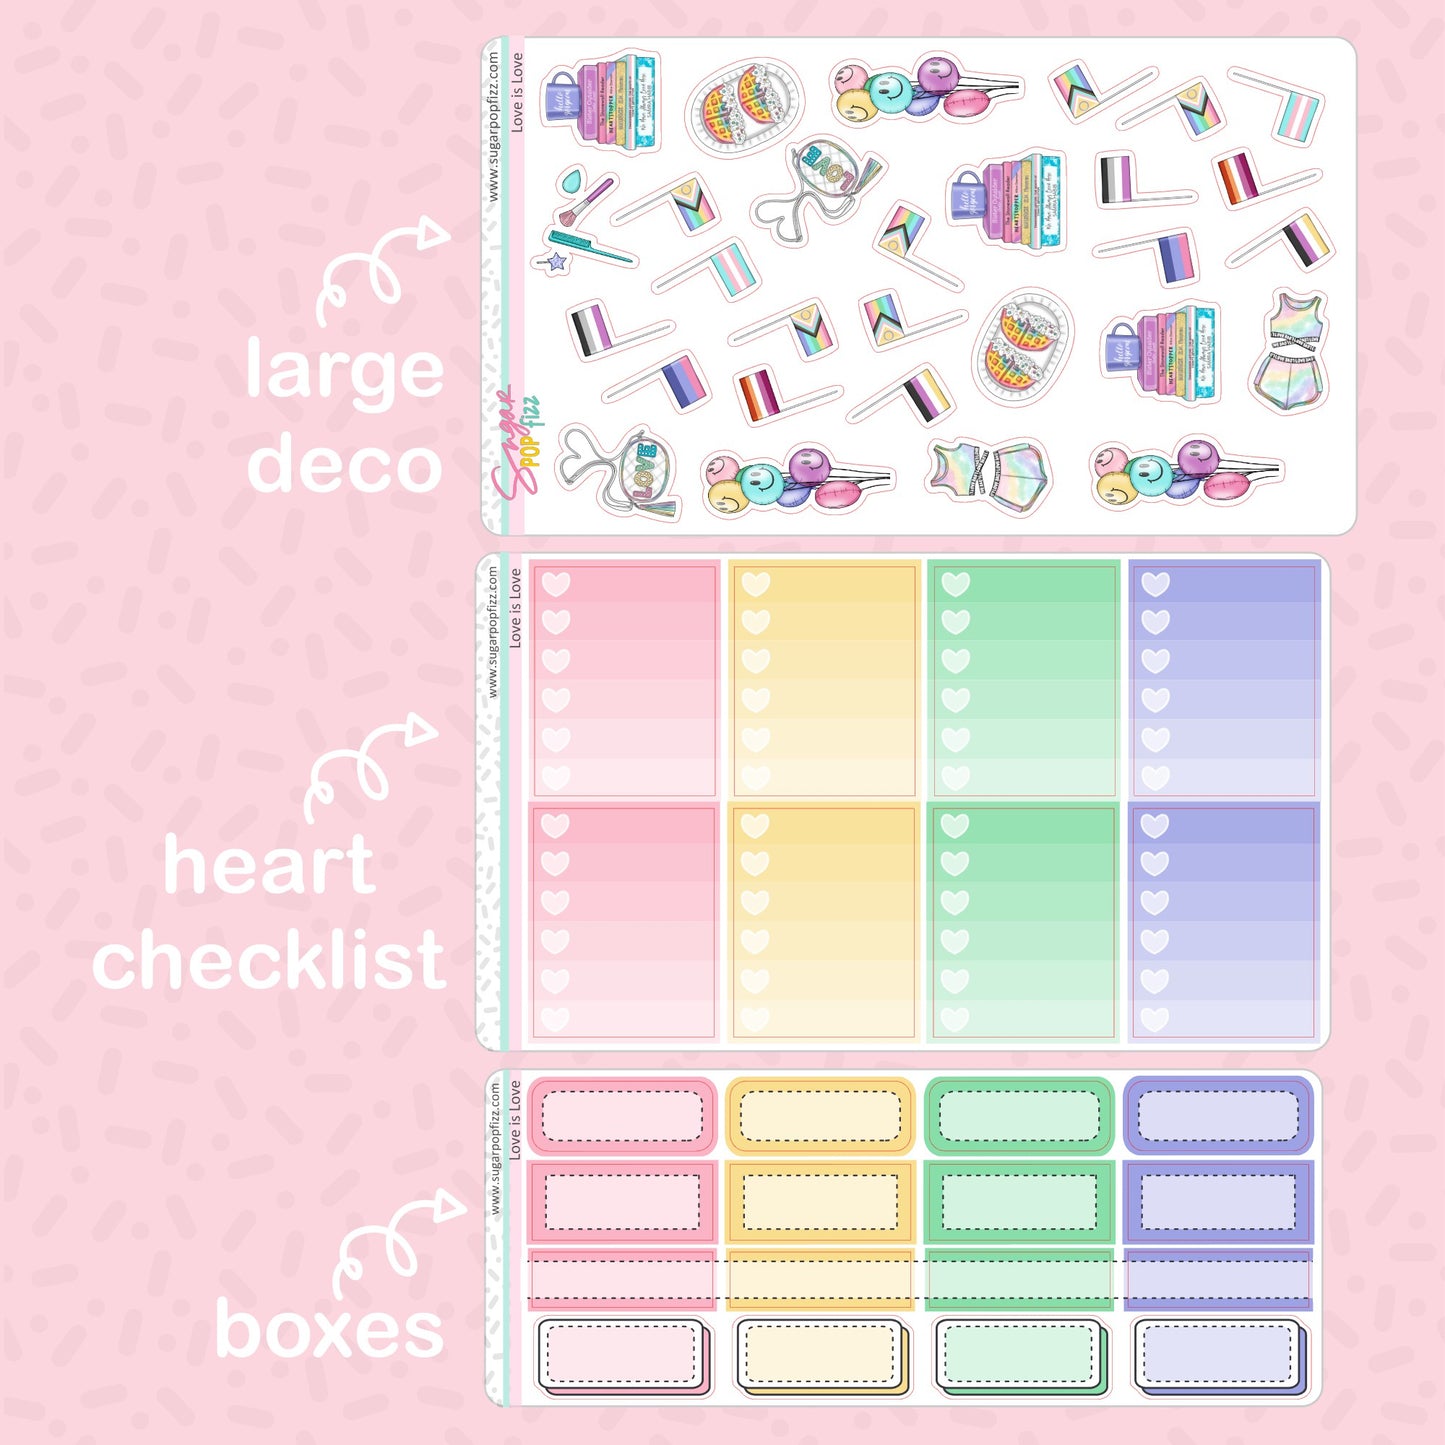 Love is Love Weekly Kit Add-ons - updated 2023